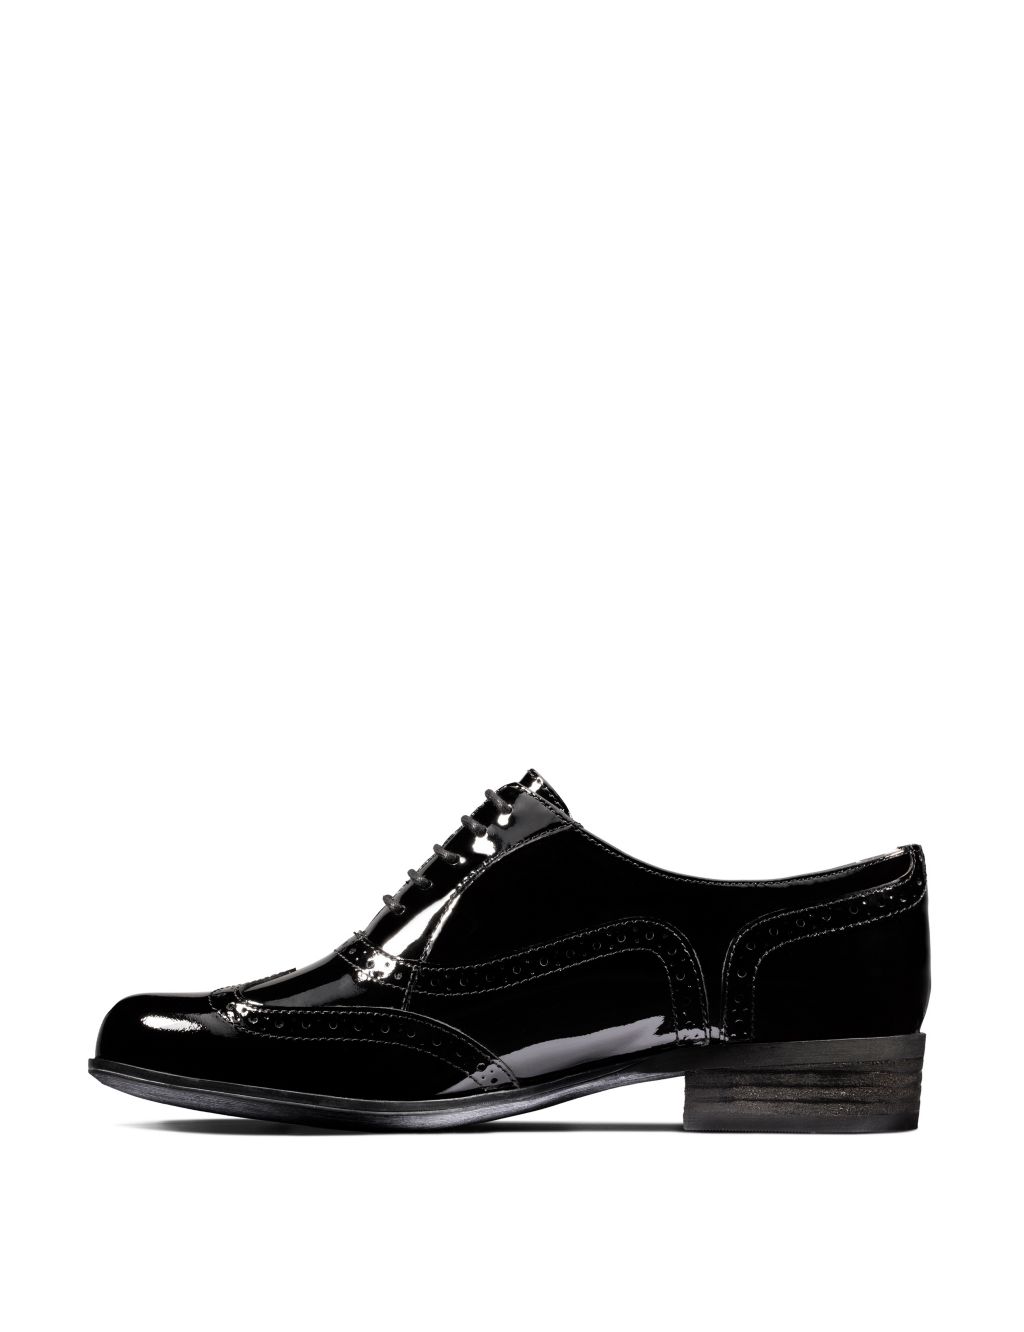 Leather Patent Lace Up Brogues image 5